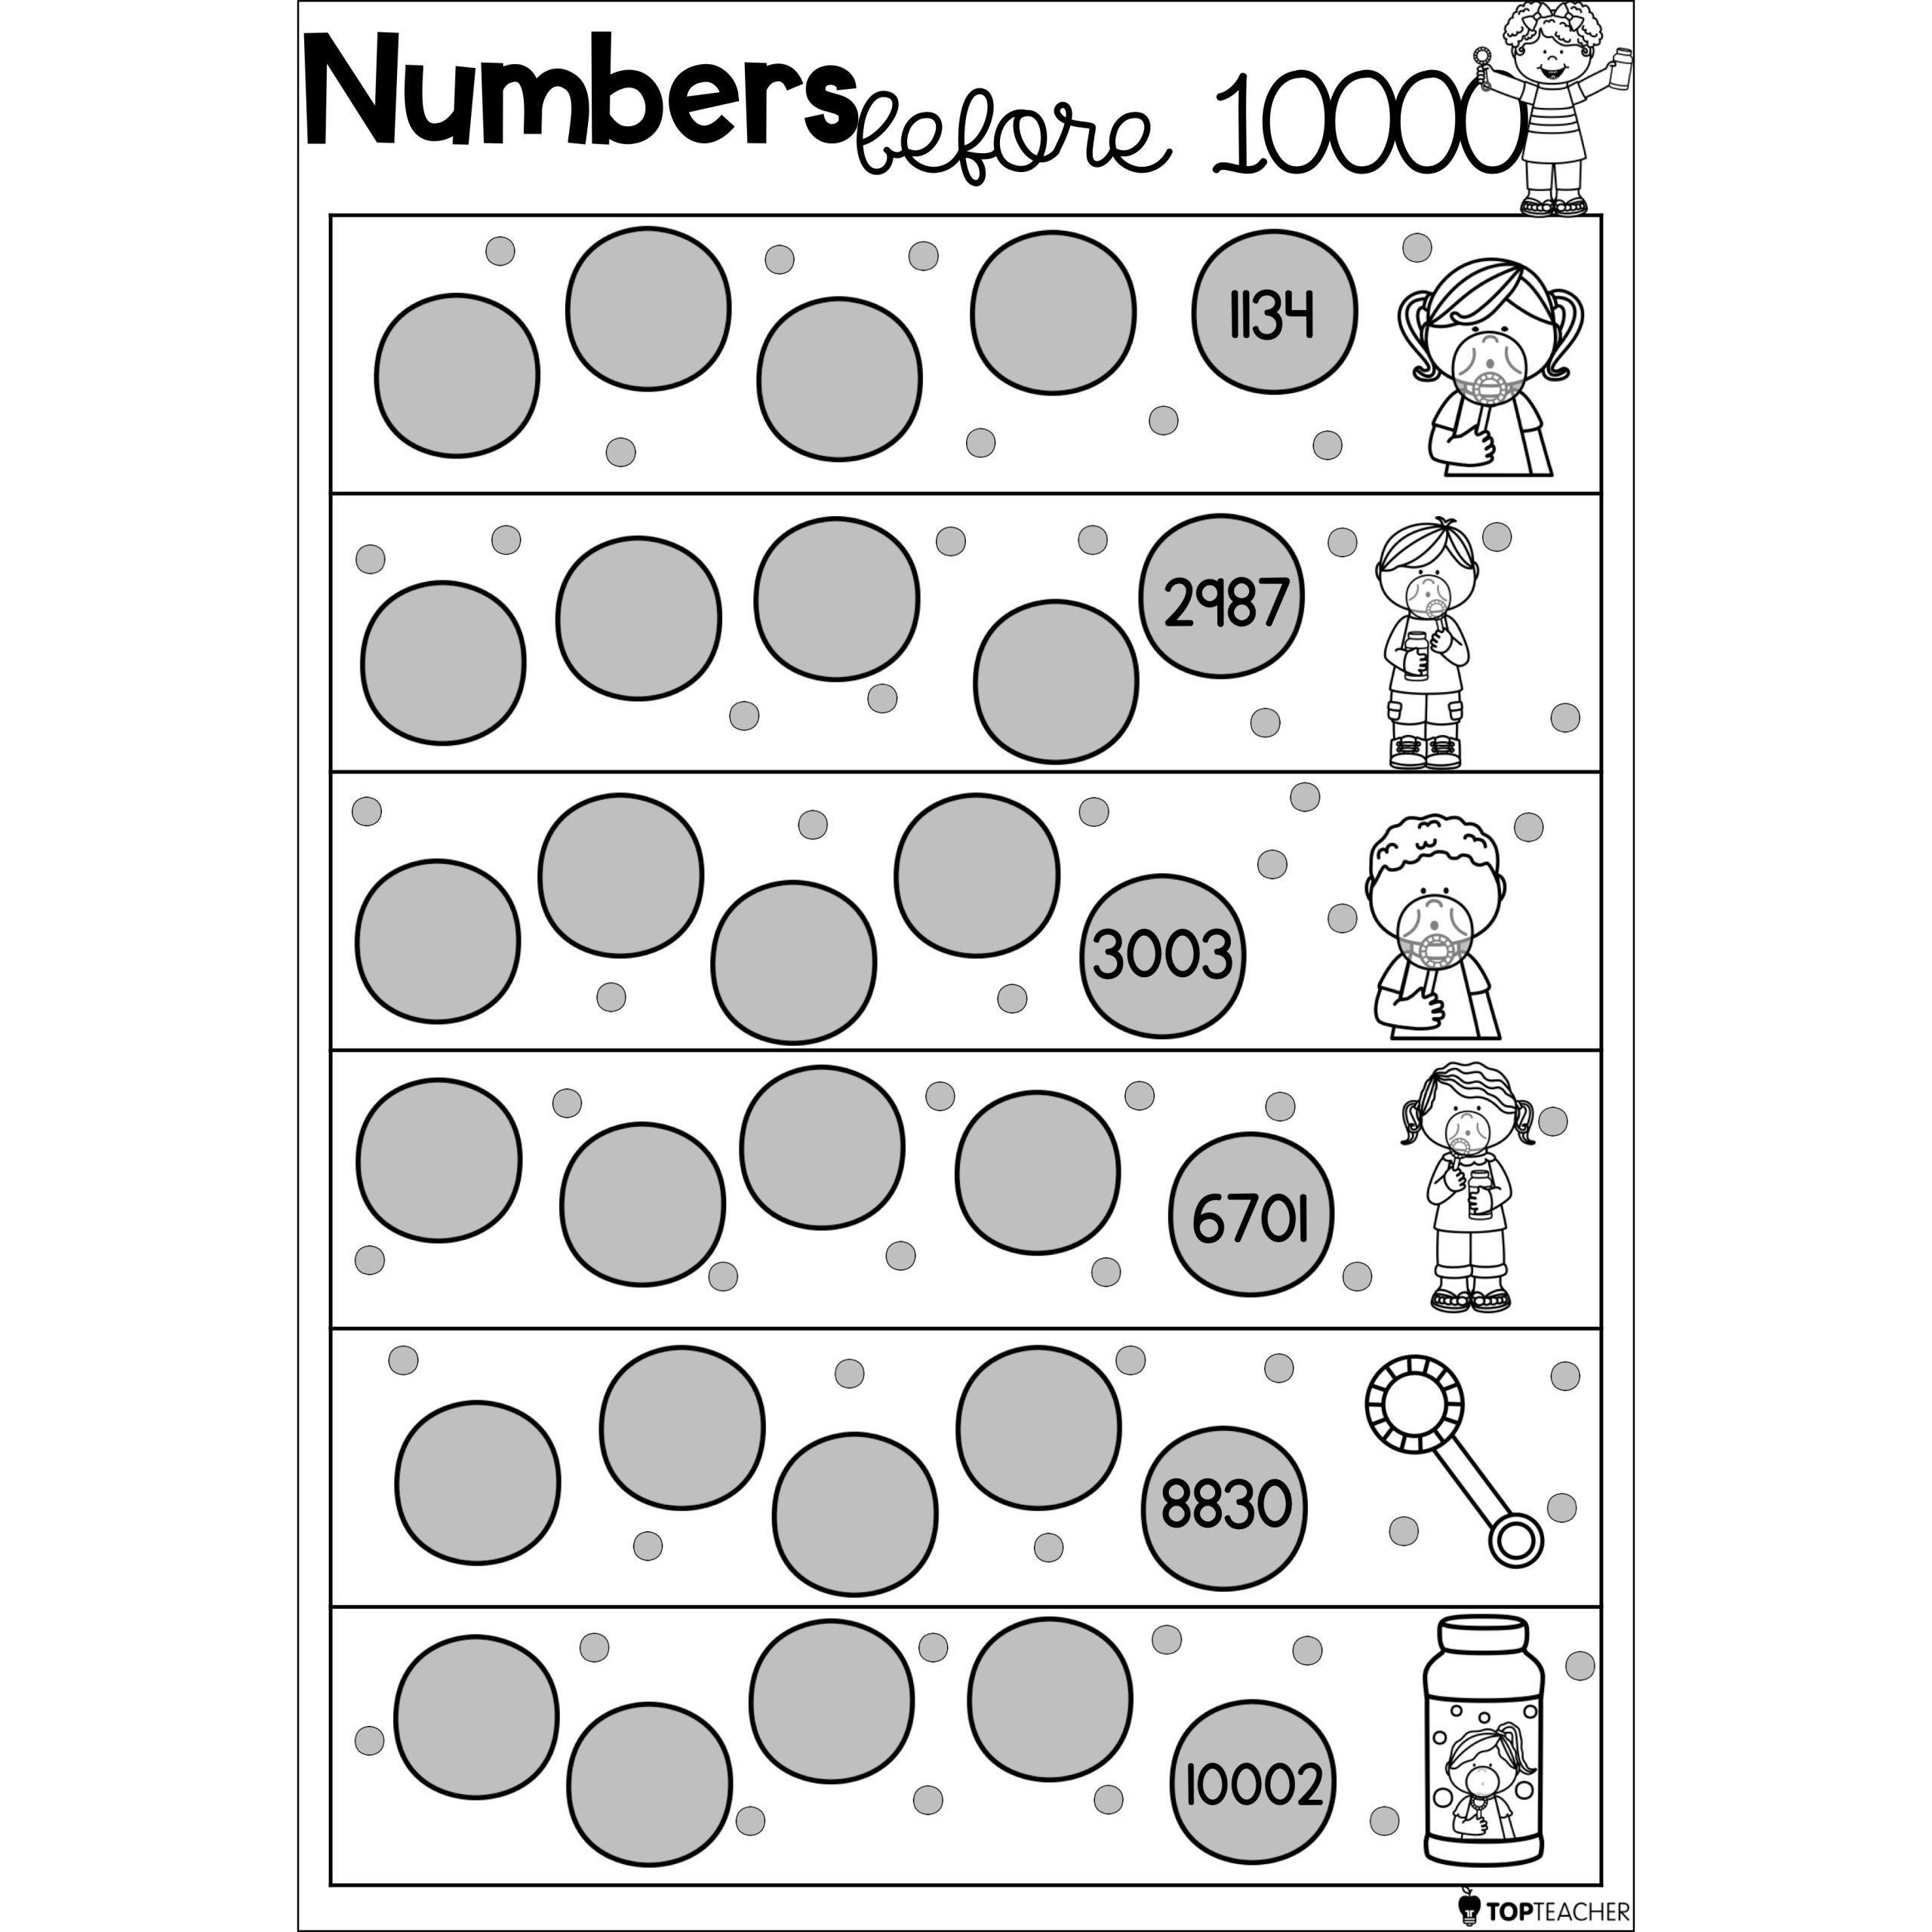 lesson-1-visualizing-numbers-up-to-10-000-000-with-emphasis-on-numbers